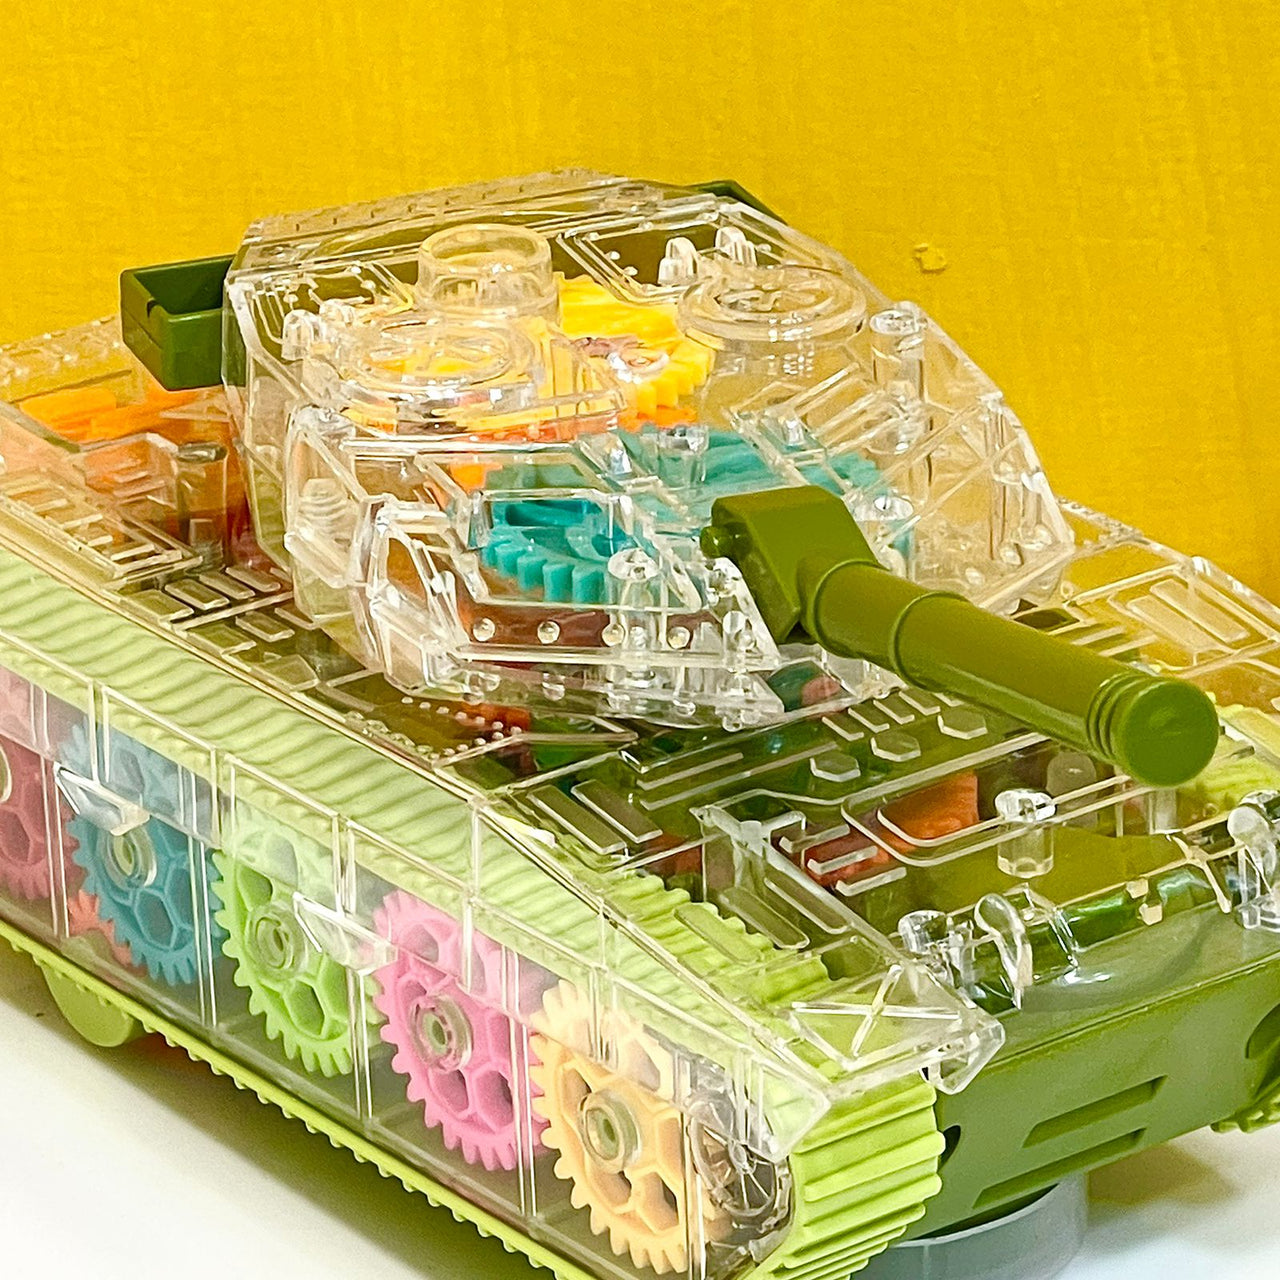 Transparent Tank Toy with Gears, Lights & Sound